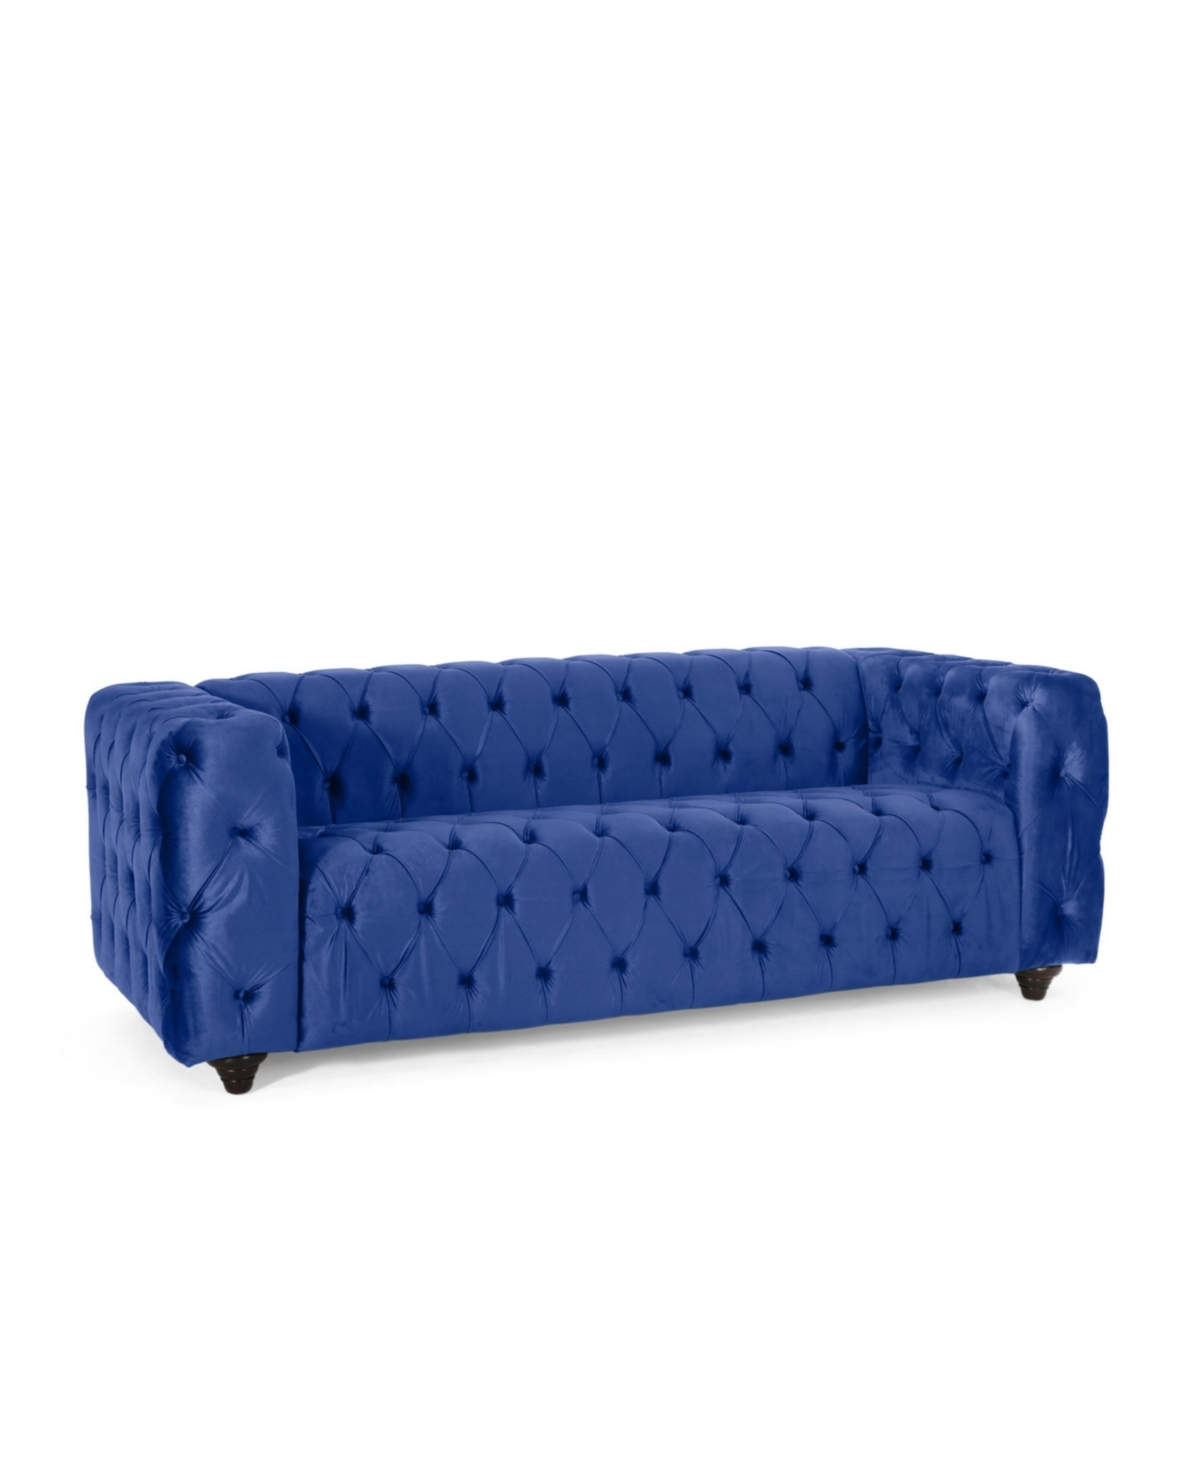 Noble House Sagewood Contemporary Tufted 3 Seater Sofa In Navy Blue